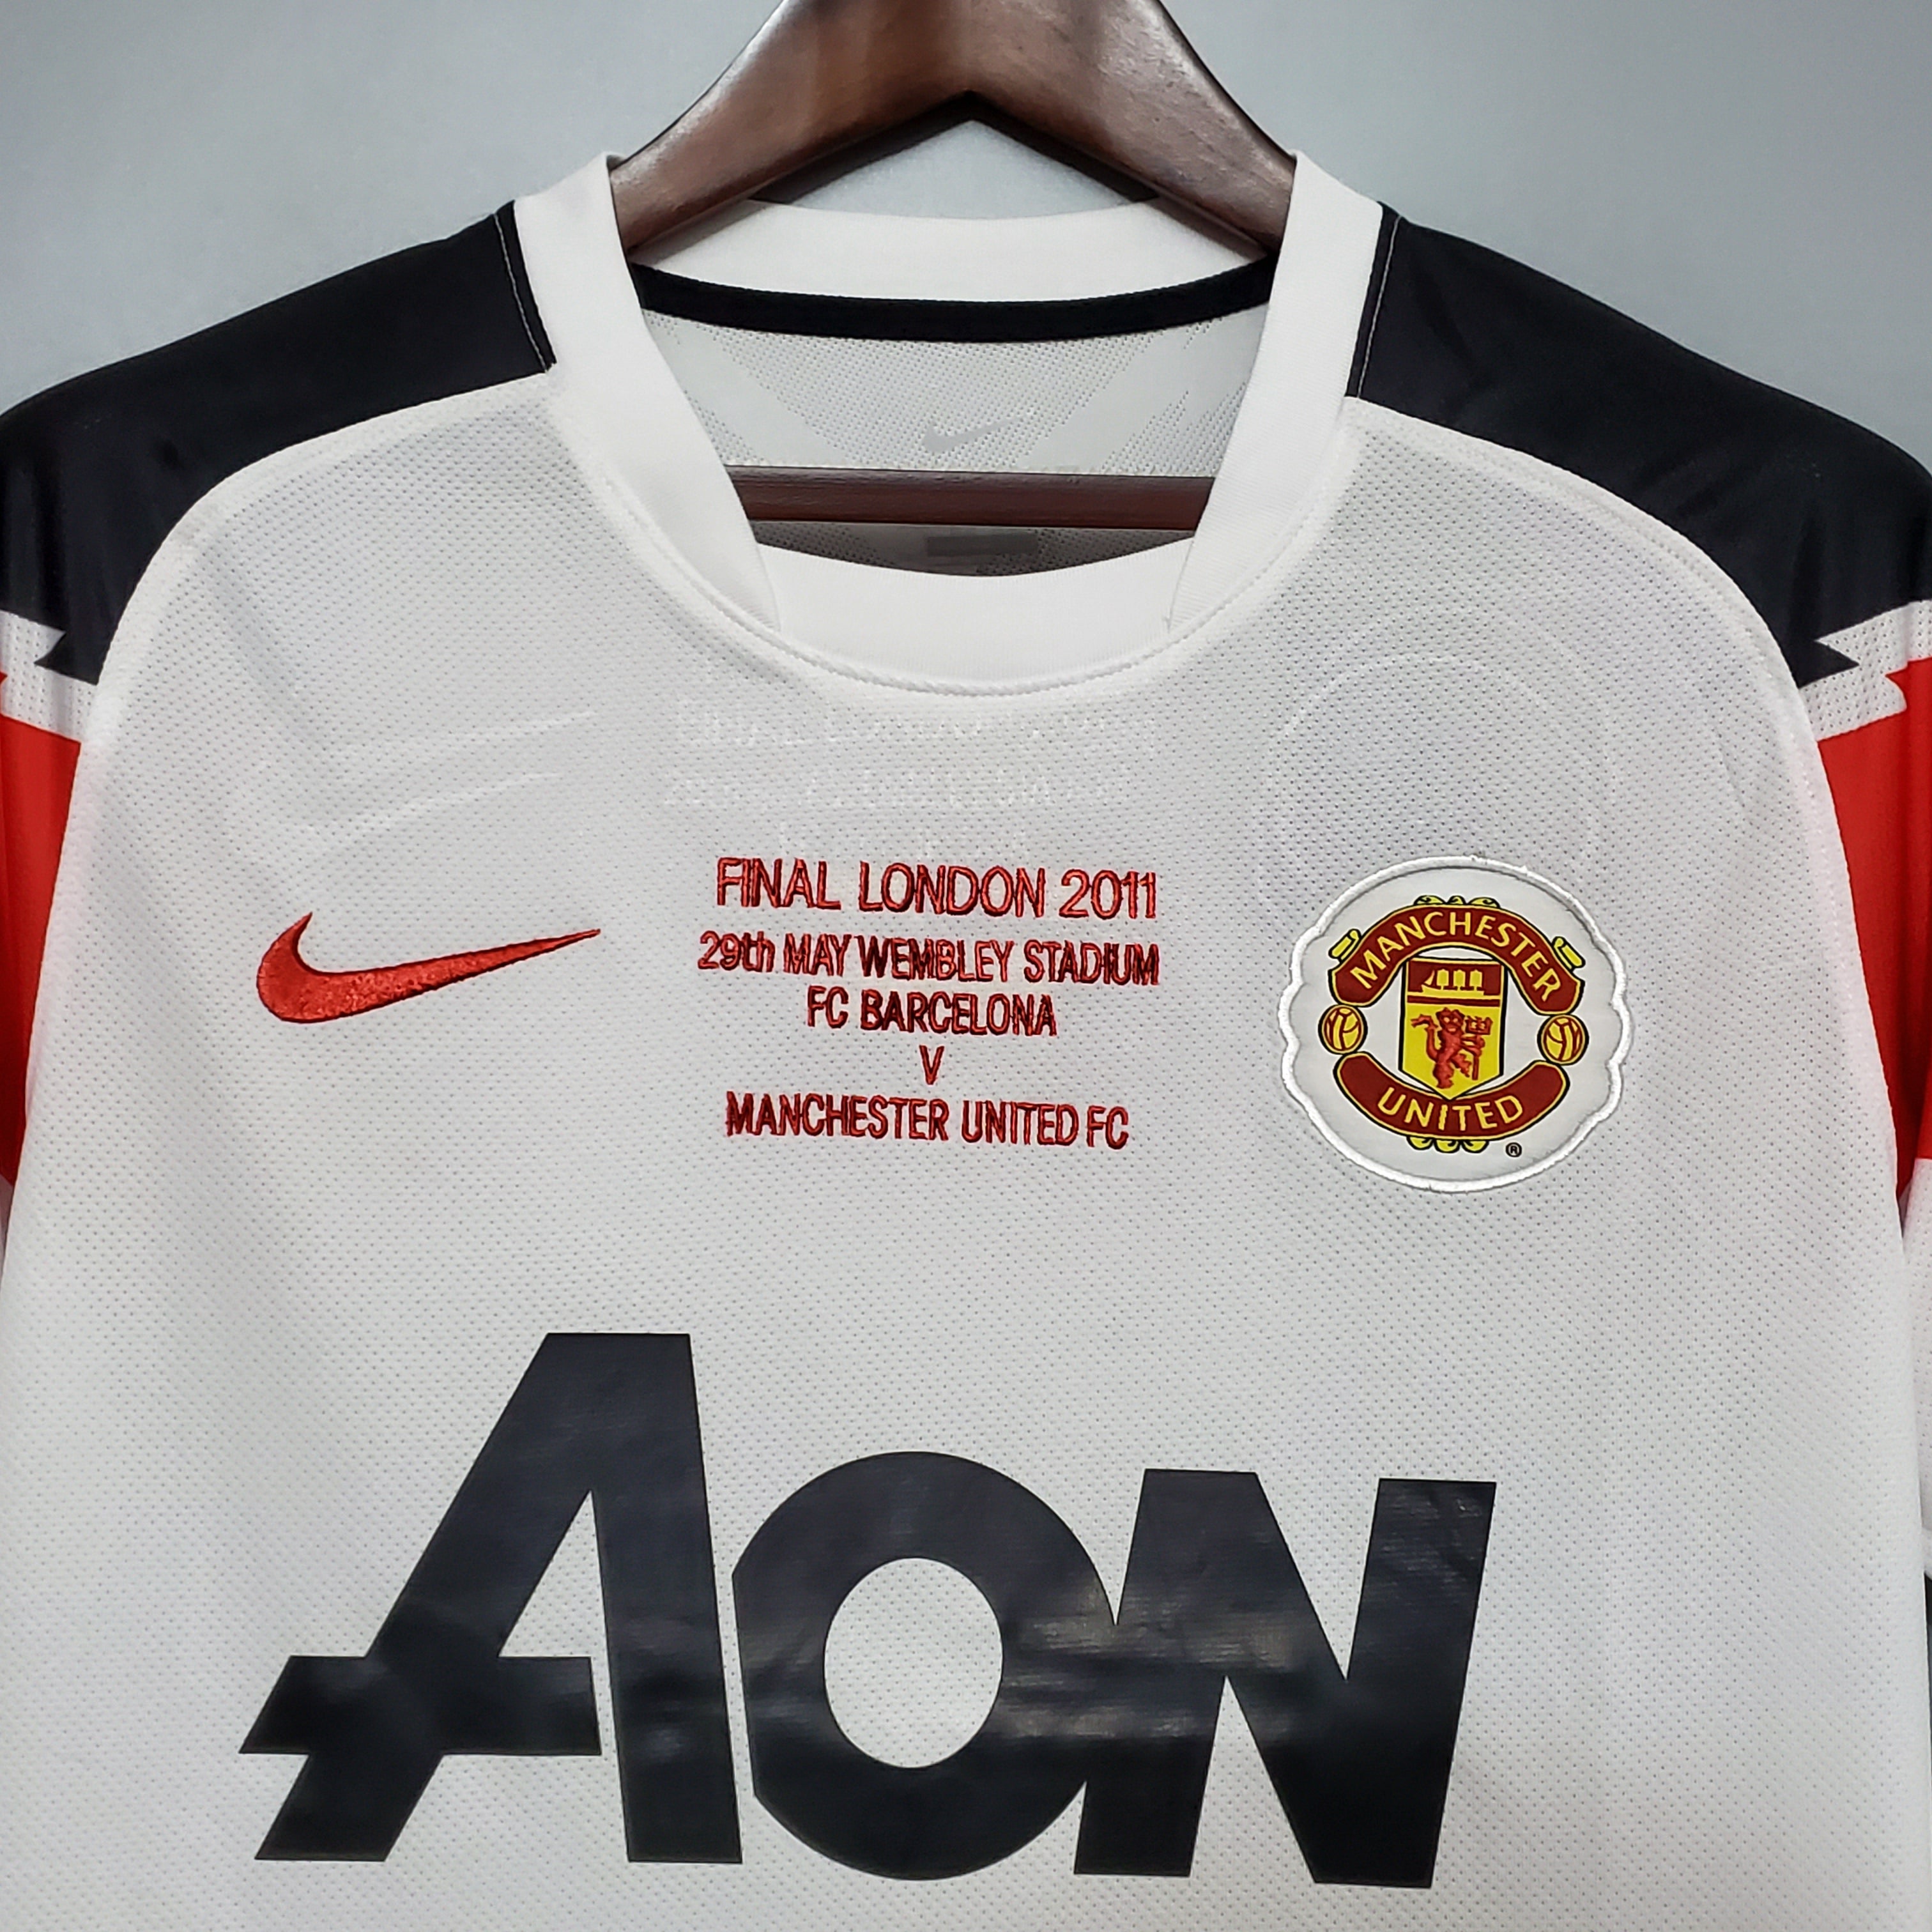 Manchester United 2010-11 Champions League Final Jersey